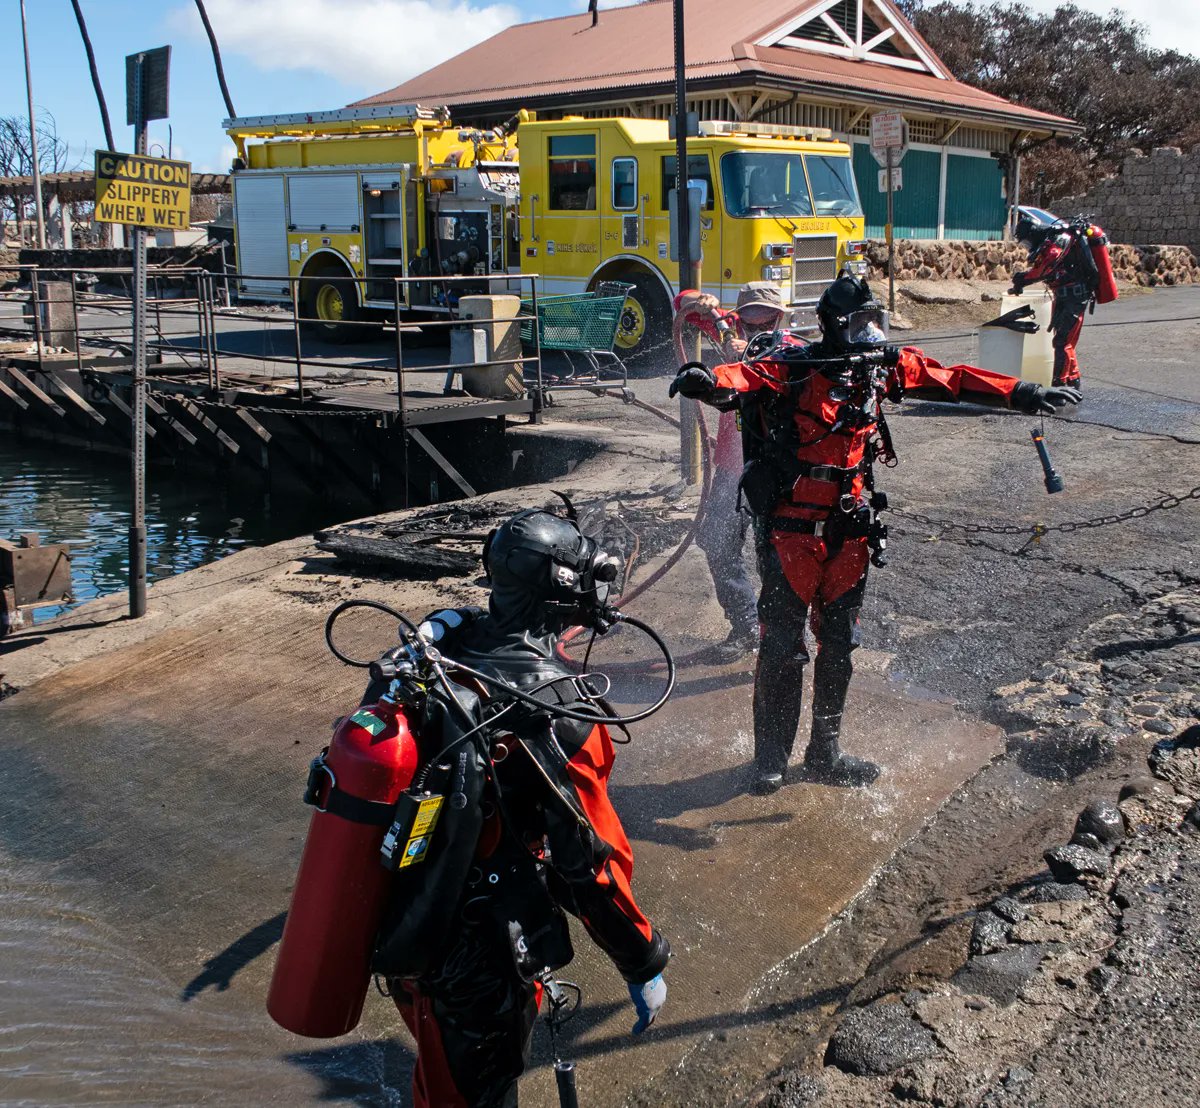 Honolulu Fire rescue divers and MFD personnel with assistance from the US Navy, completed underwater searches of Lahaina Harbor over the weekend. 

#maui #community #ohana #oneteamonefight